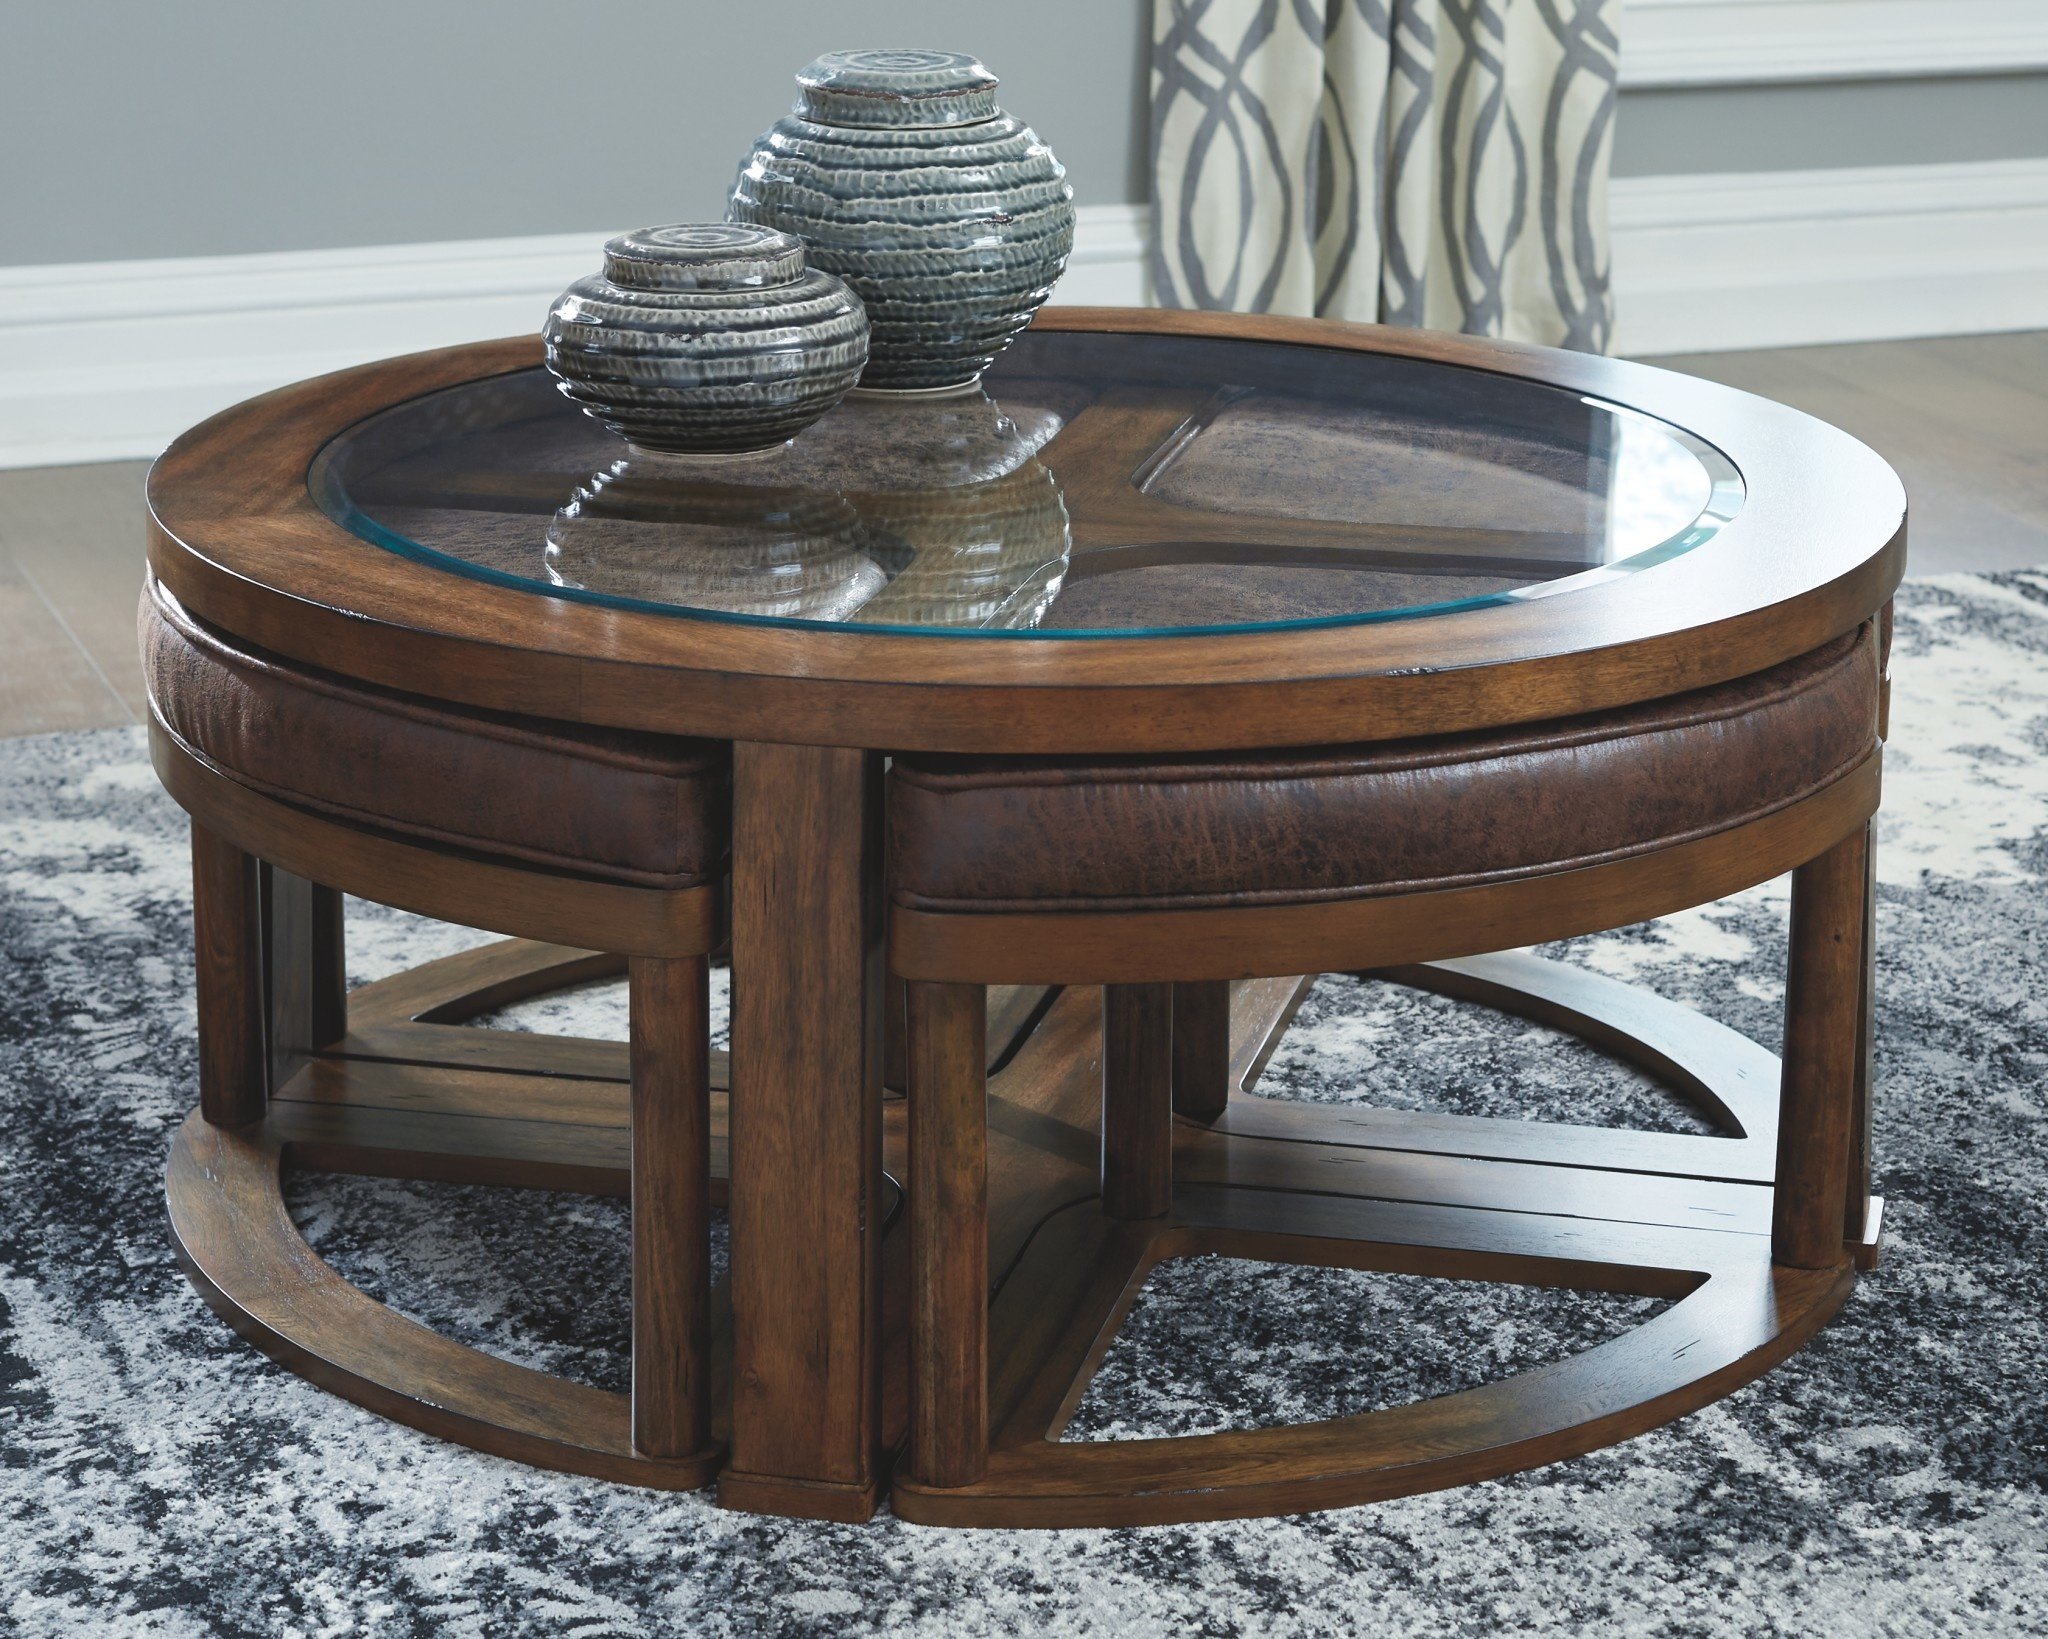 Signature Design Cocktail Table w/4 Stools- "Hannery" Brown T725-8